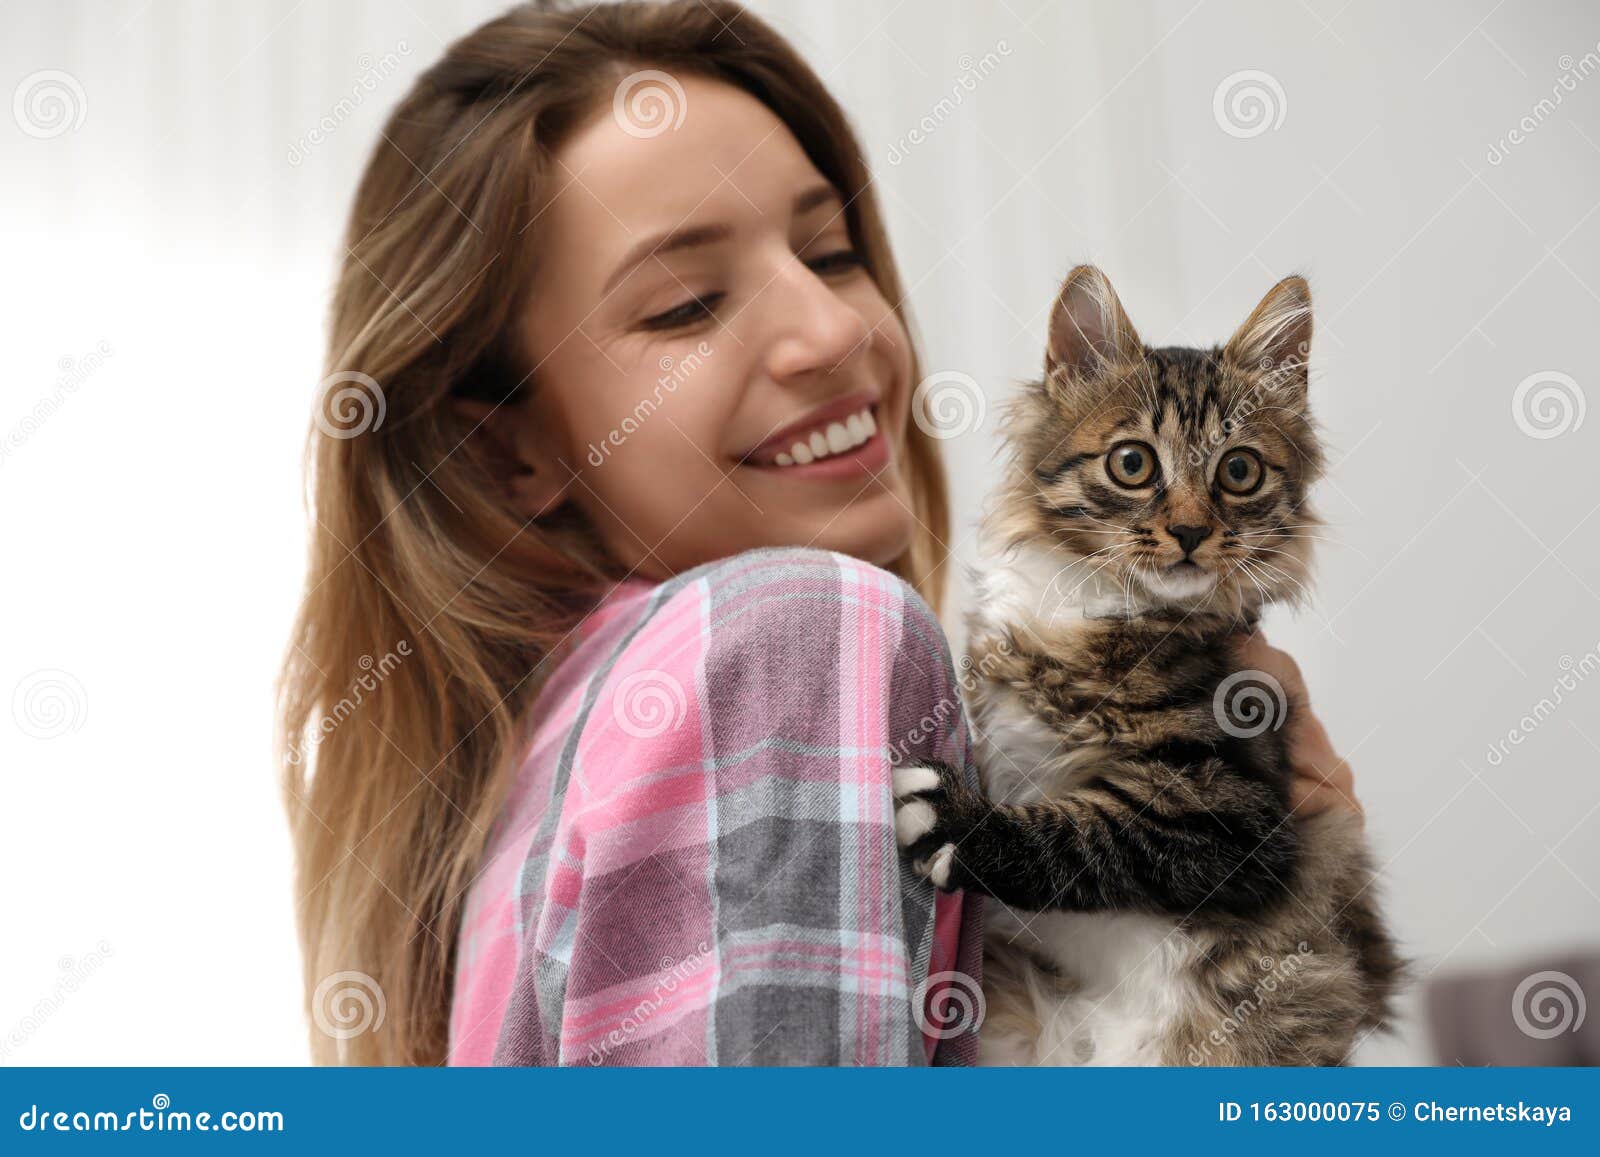 Woman Wearing Pajama with Cat. Owner and Pet Stock Image - Image of ...